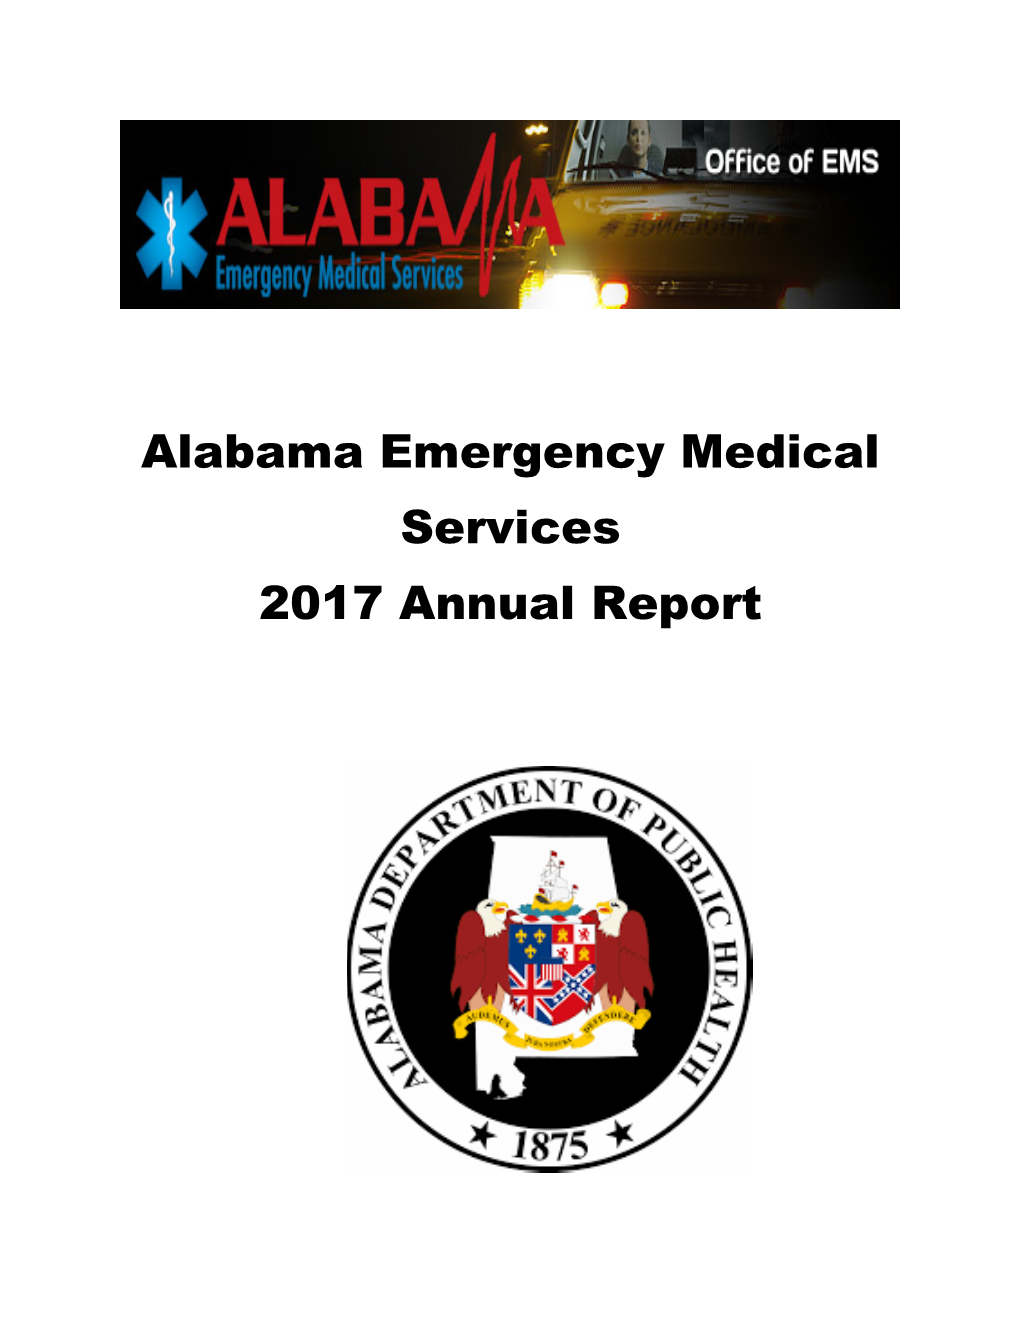 Alabama Emergency Medical Services 2017 Annual Report